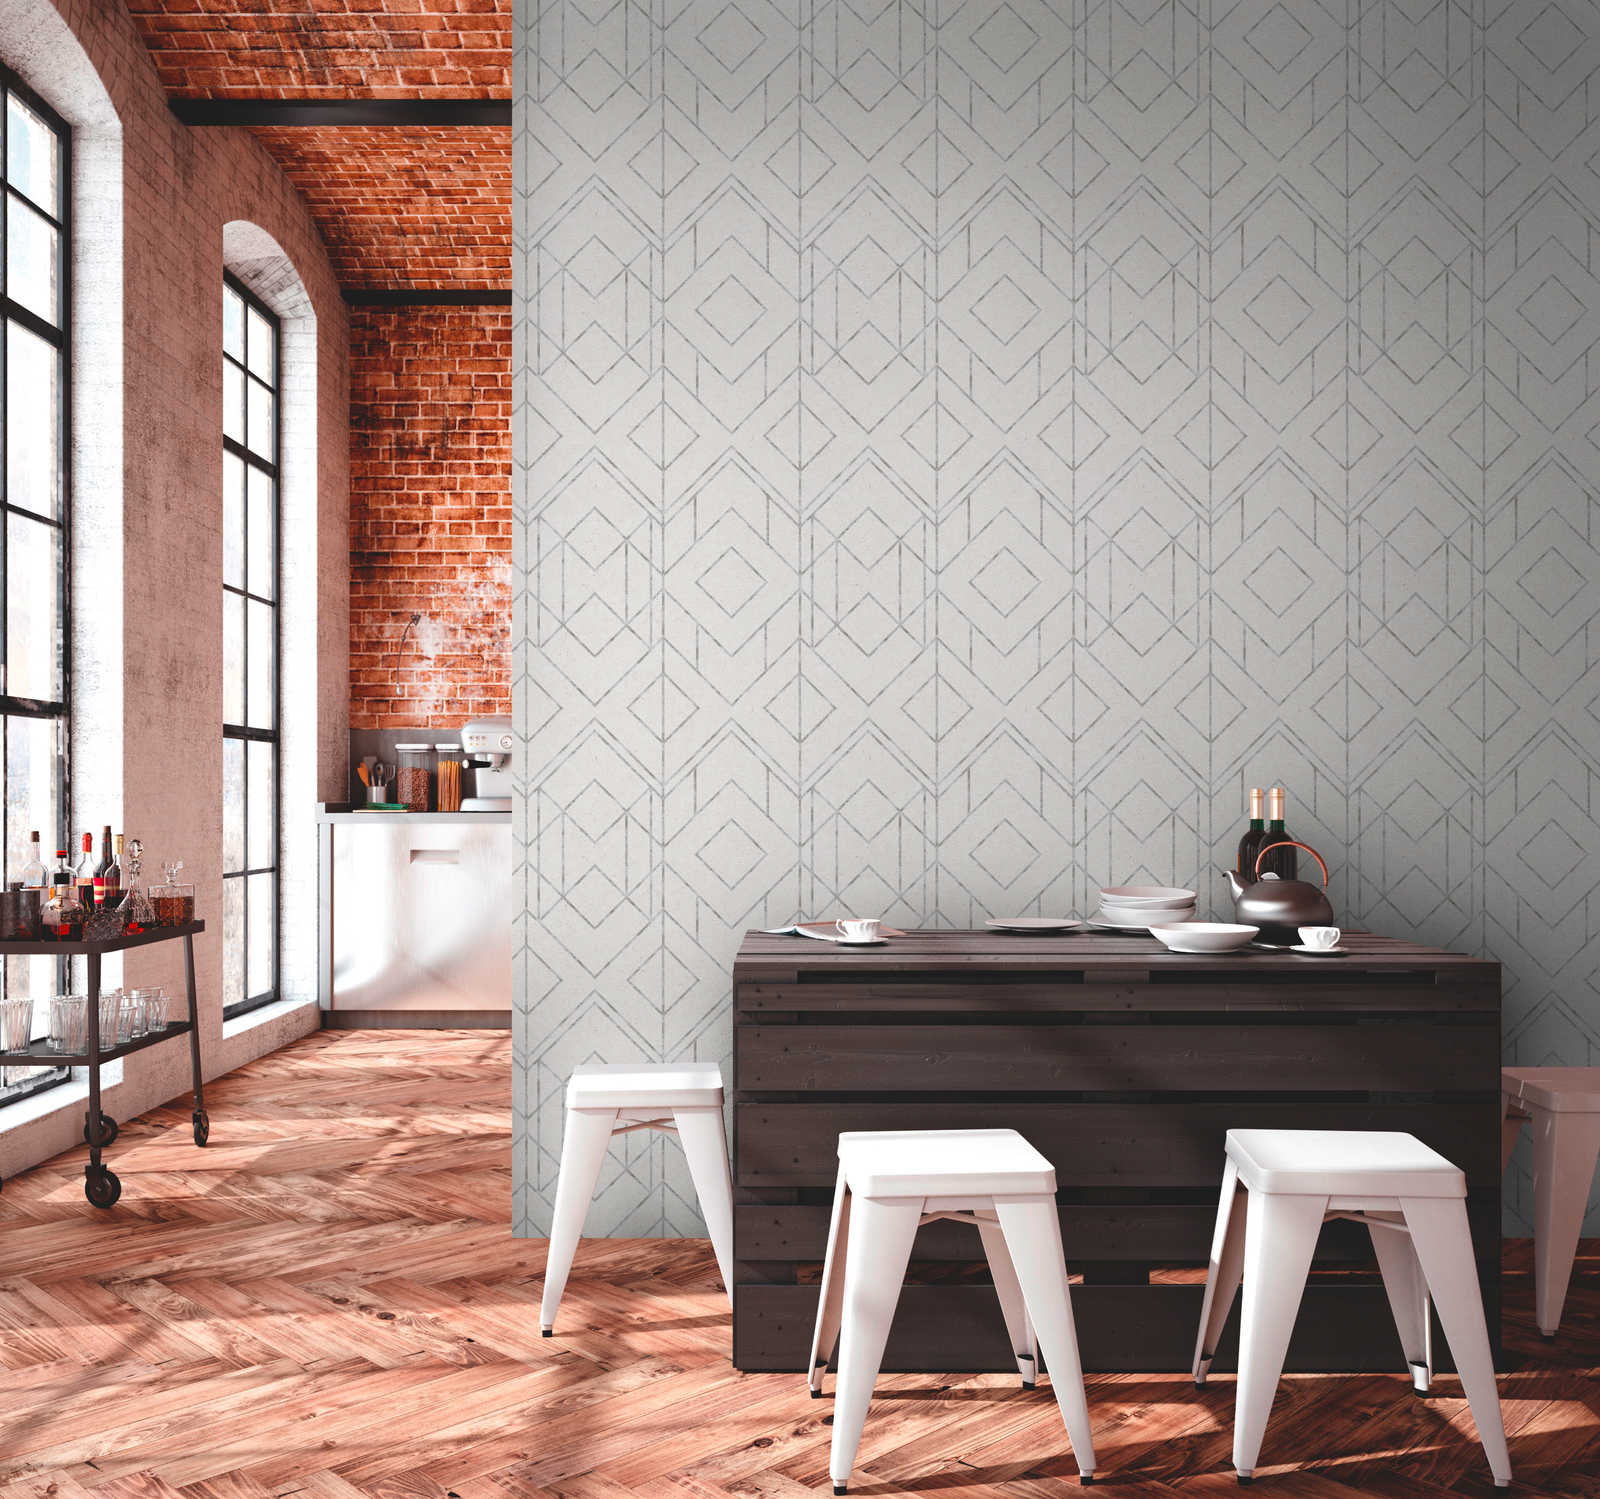             Graphic pattern wallpaper with metallic accents - grey, metallic, white
        